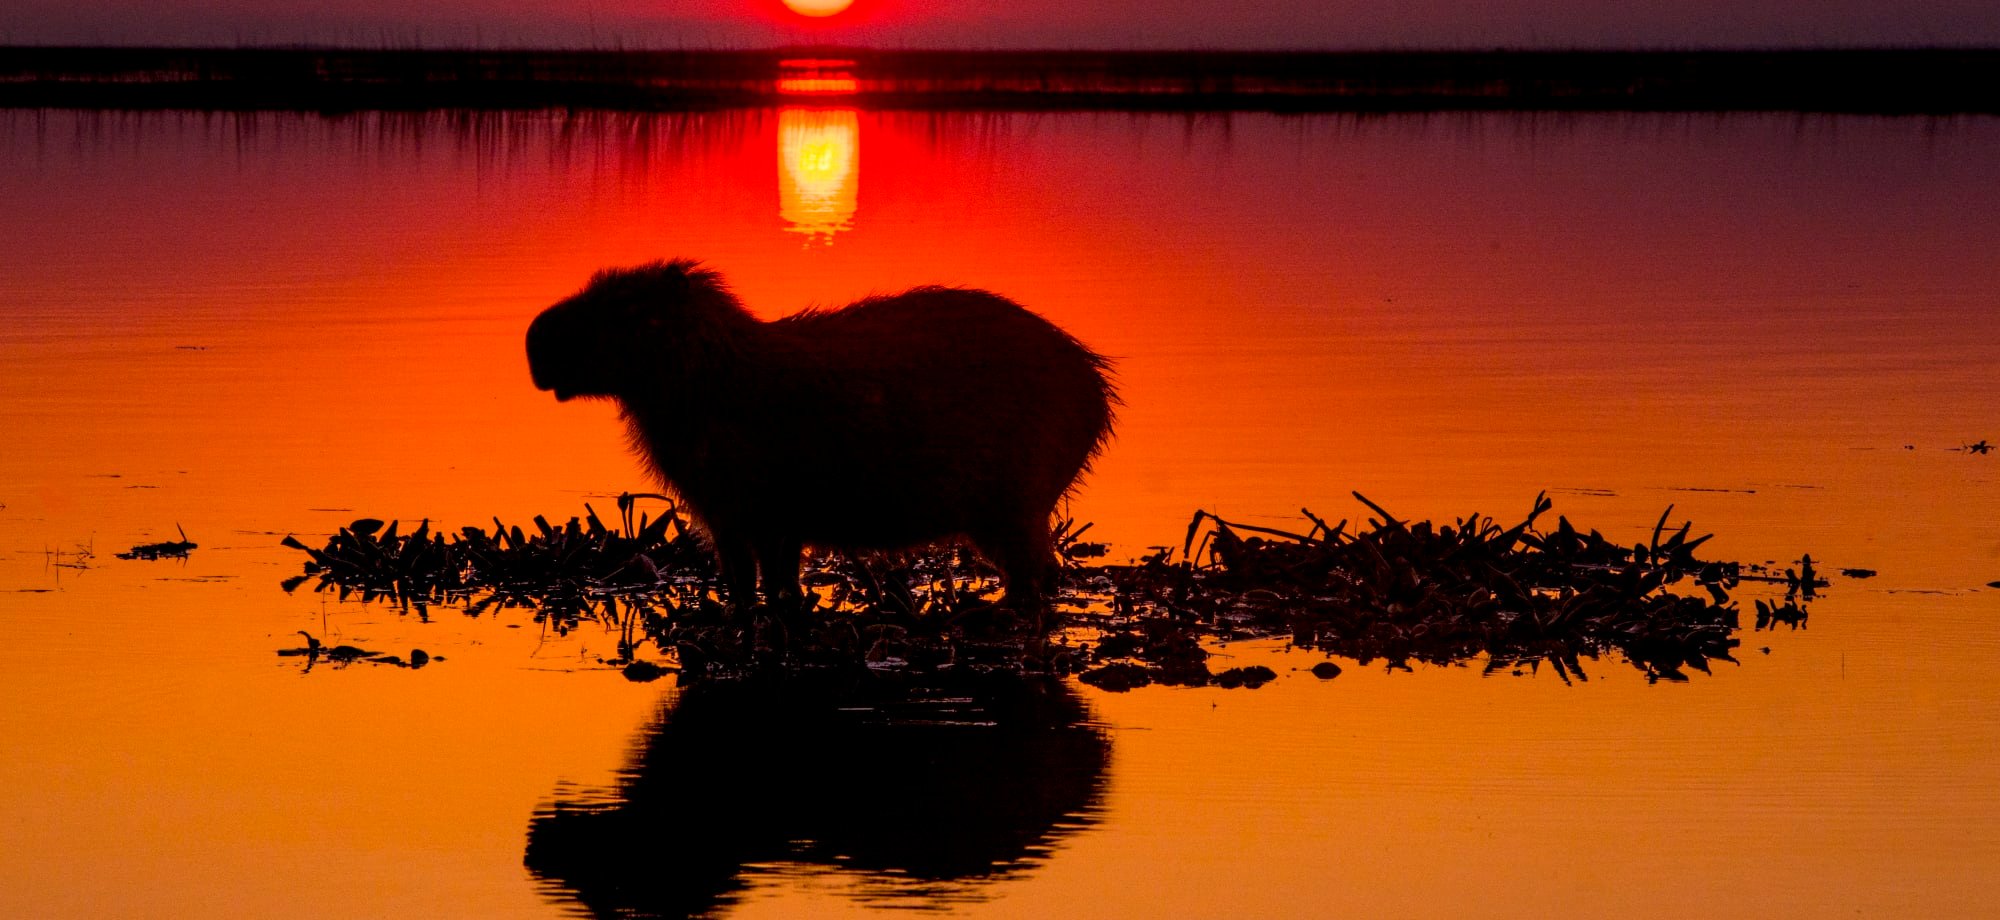 A Capybara stands in the water as the sun sets, cascading a vibrant red and orange huge over the water.